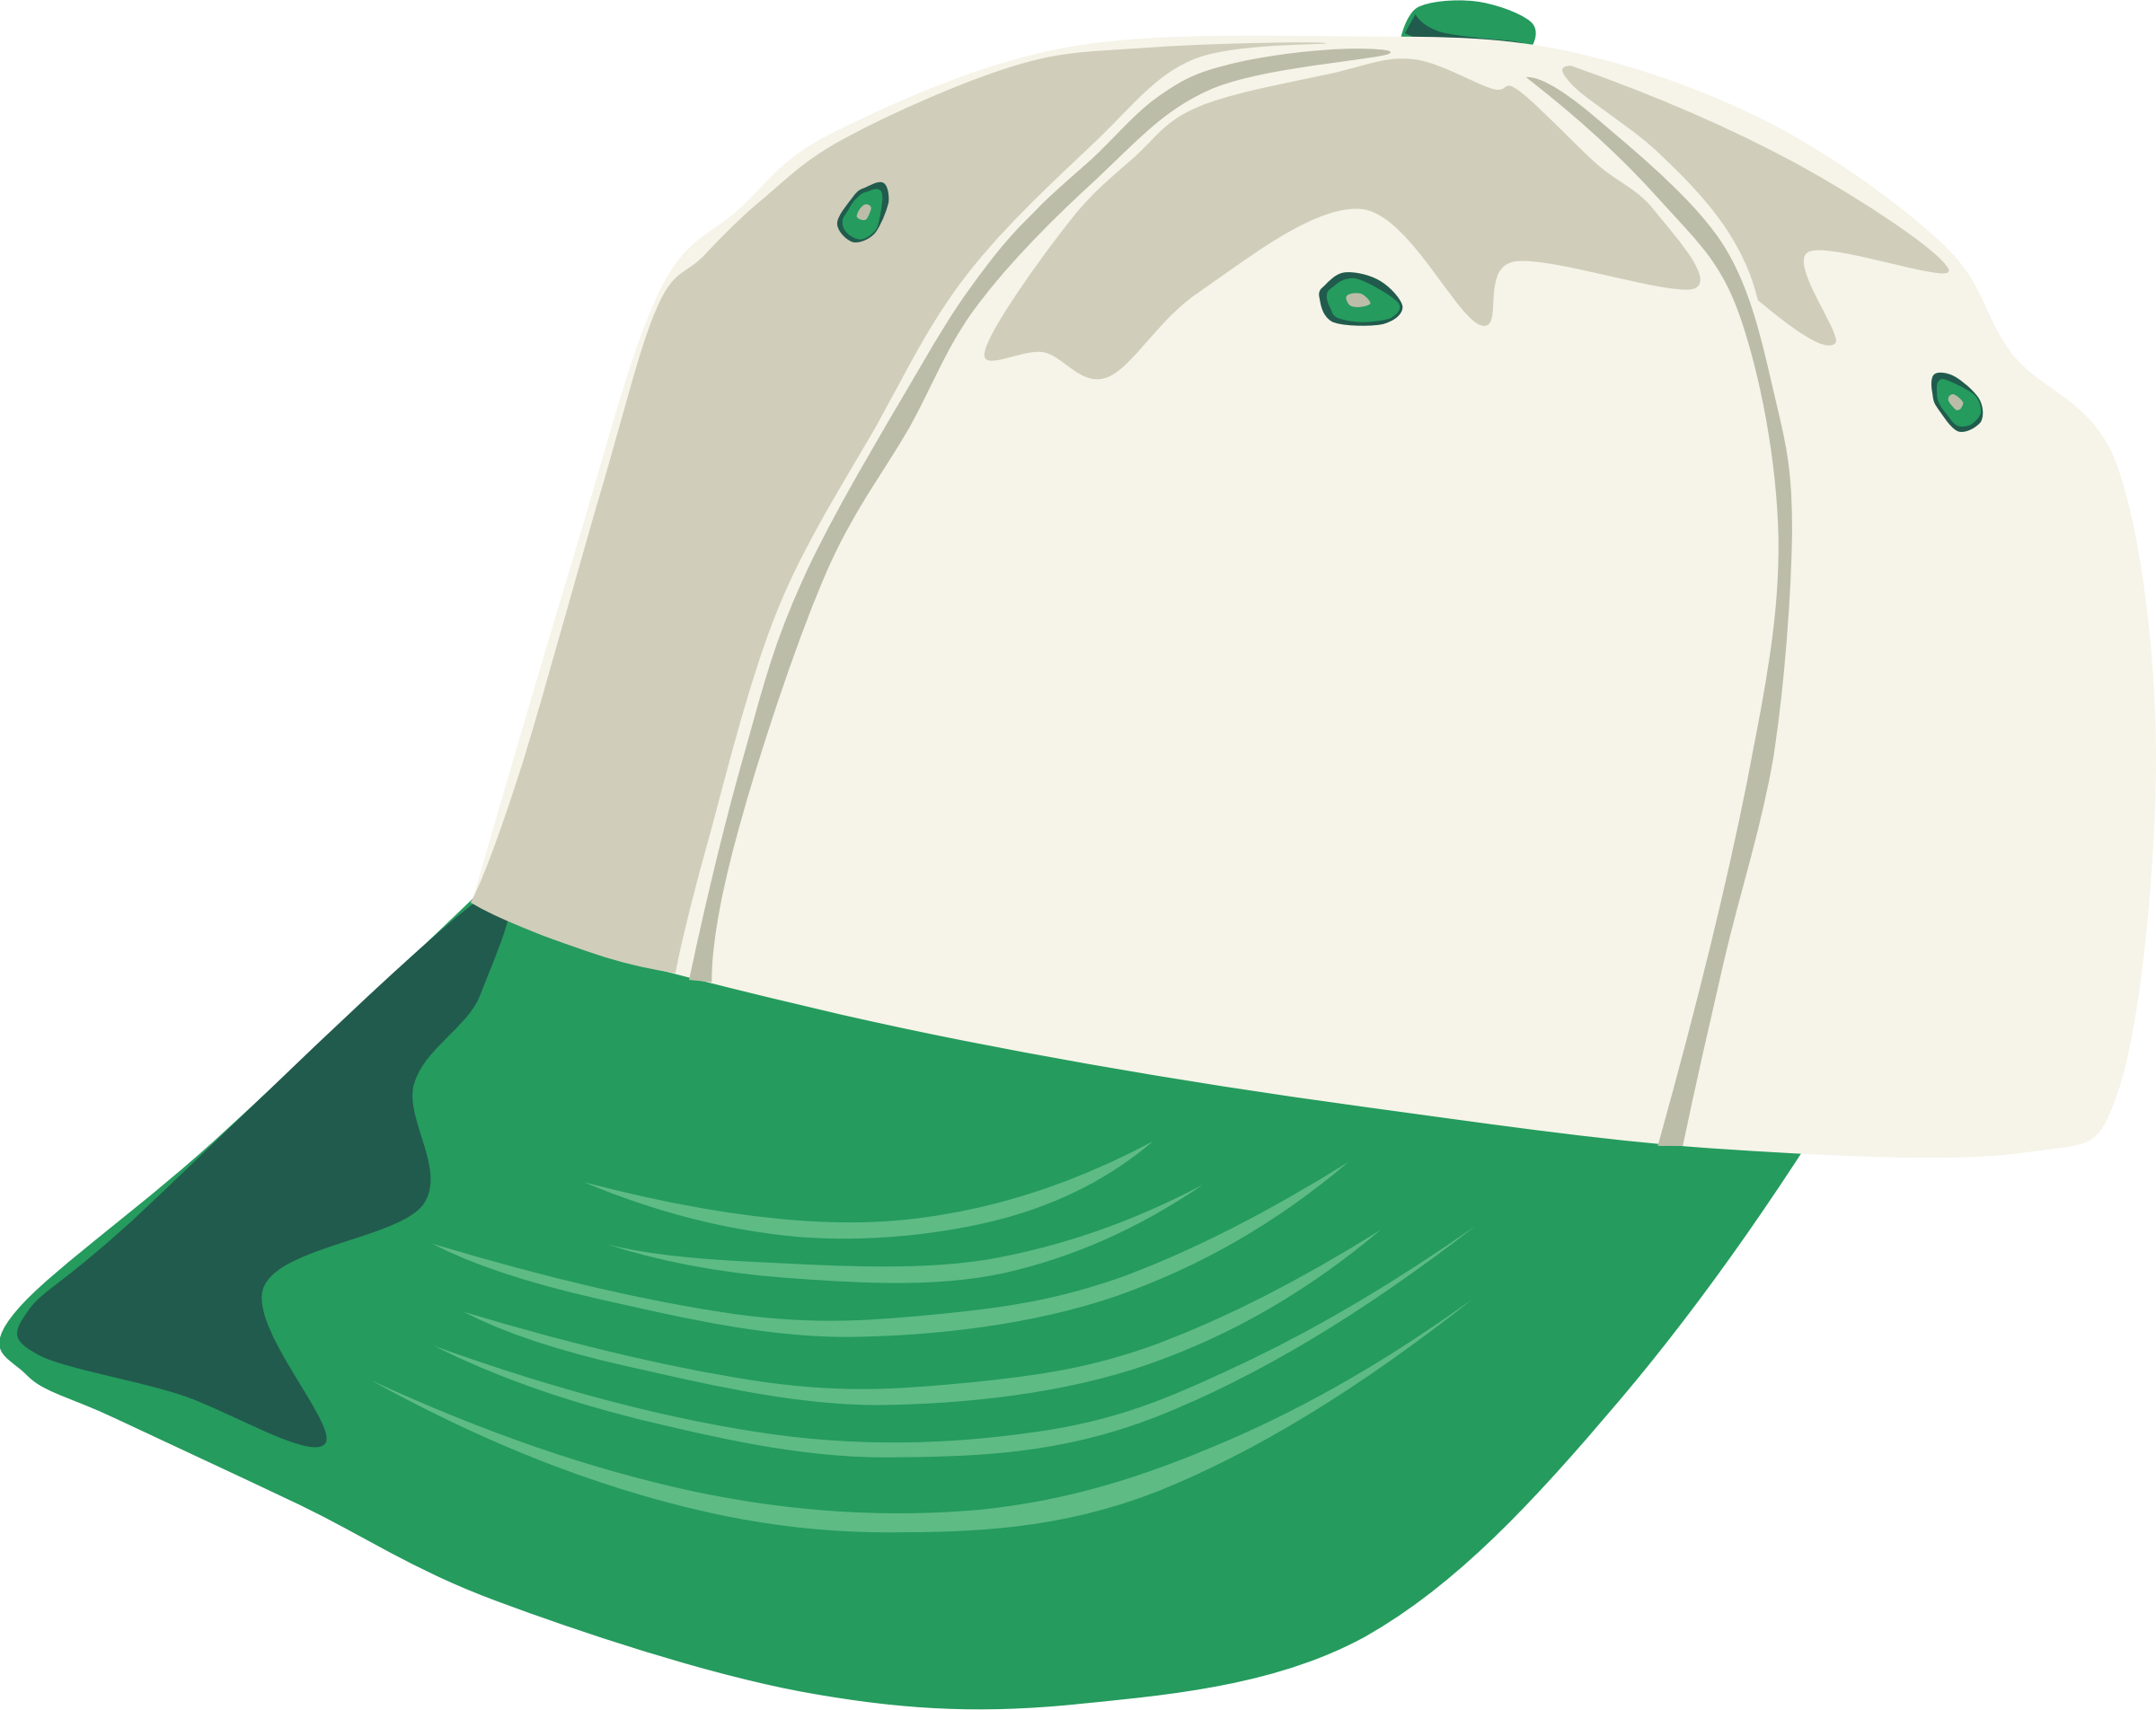 Baseball cap by gerald. Evaporation clipart wet thing